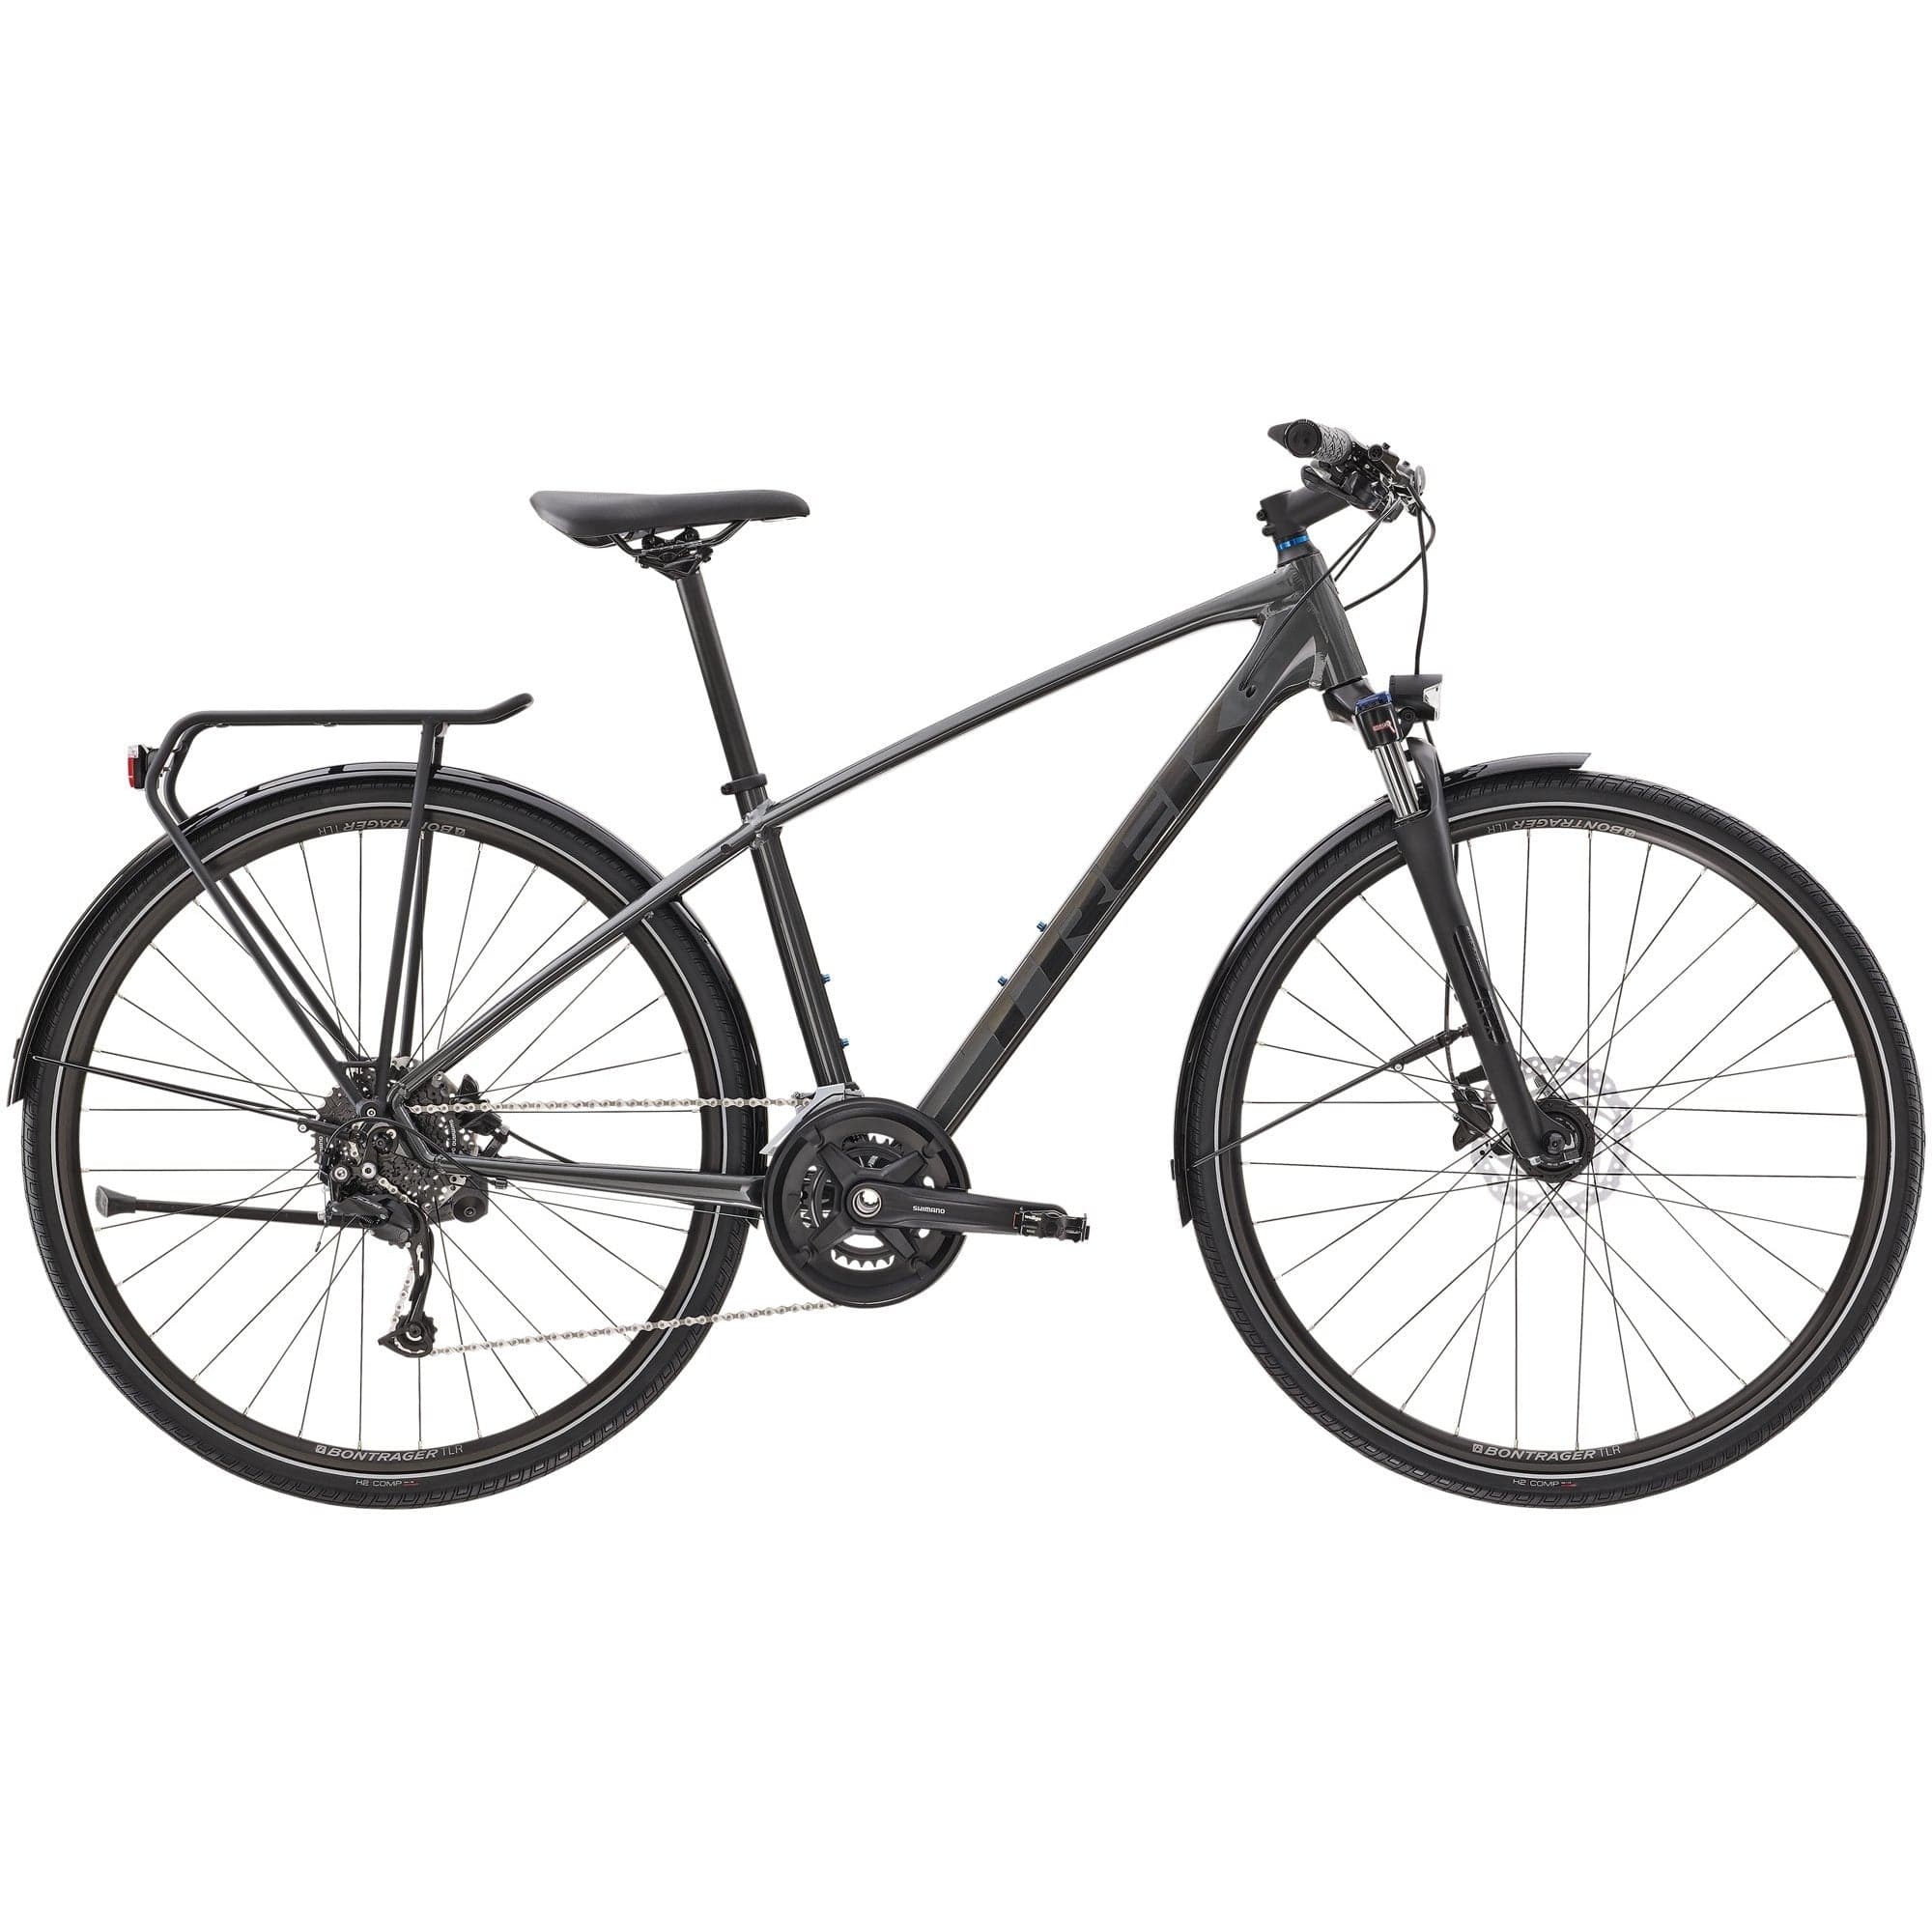 Trek Dual Sport 3 Equiped 2021 - fitted with mudguards, lights and a rear rack